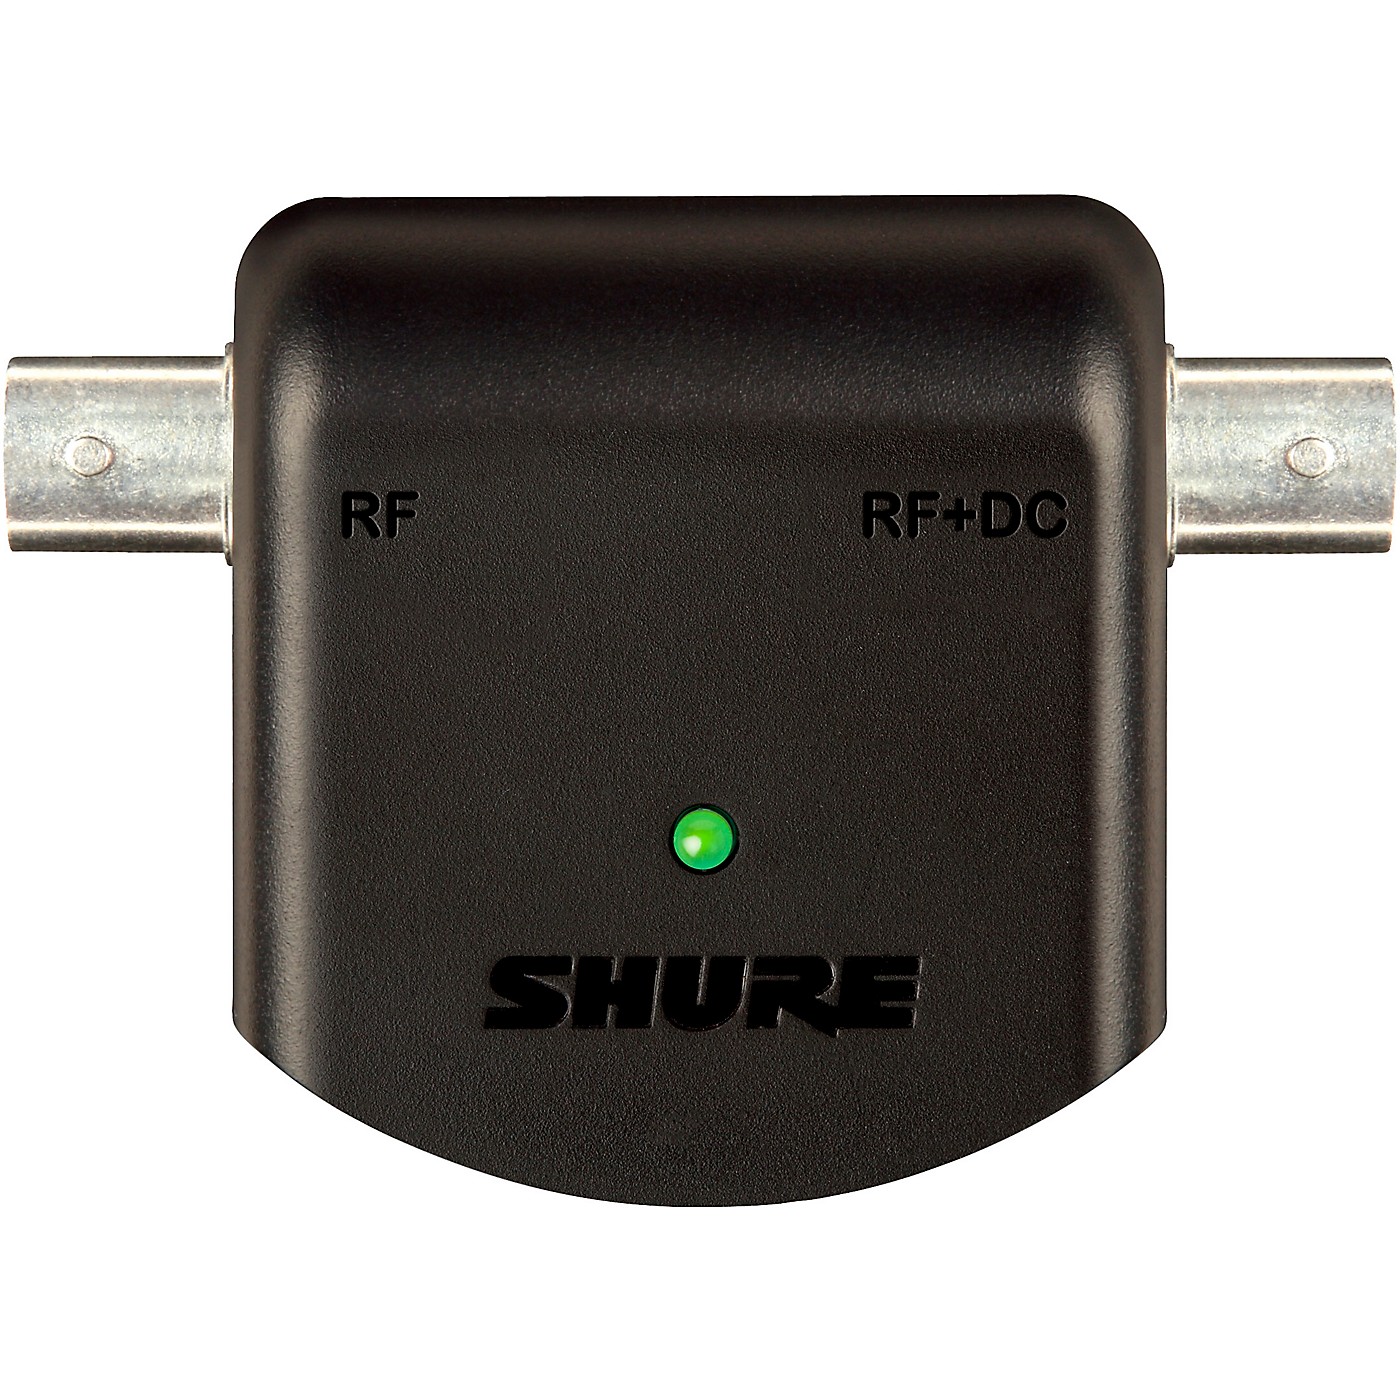 Shure UABIAST-US In-line adapter. Supplies 12V DC bias power over coaxial BNC cable, includes PS23US thumbnail